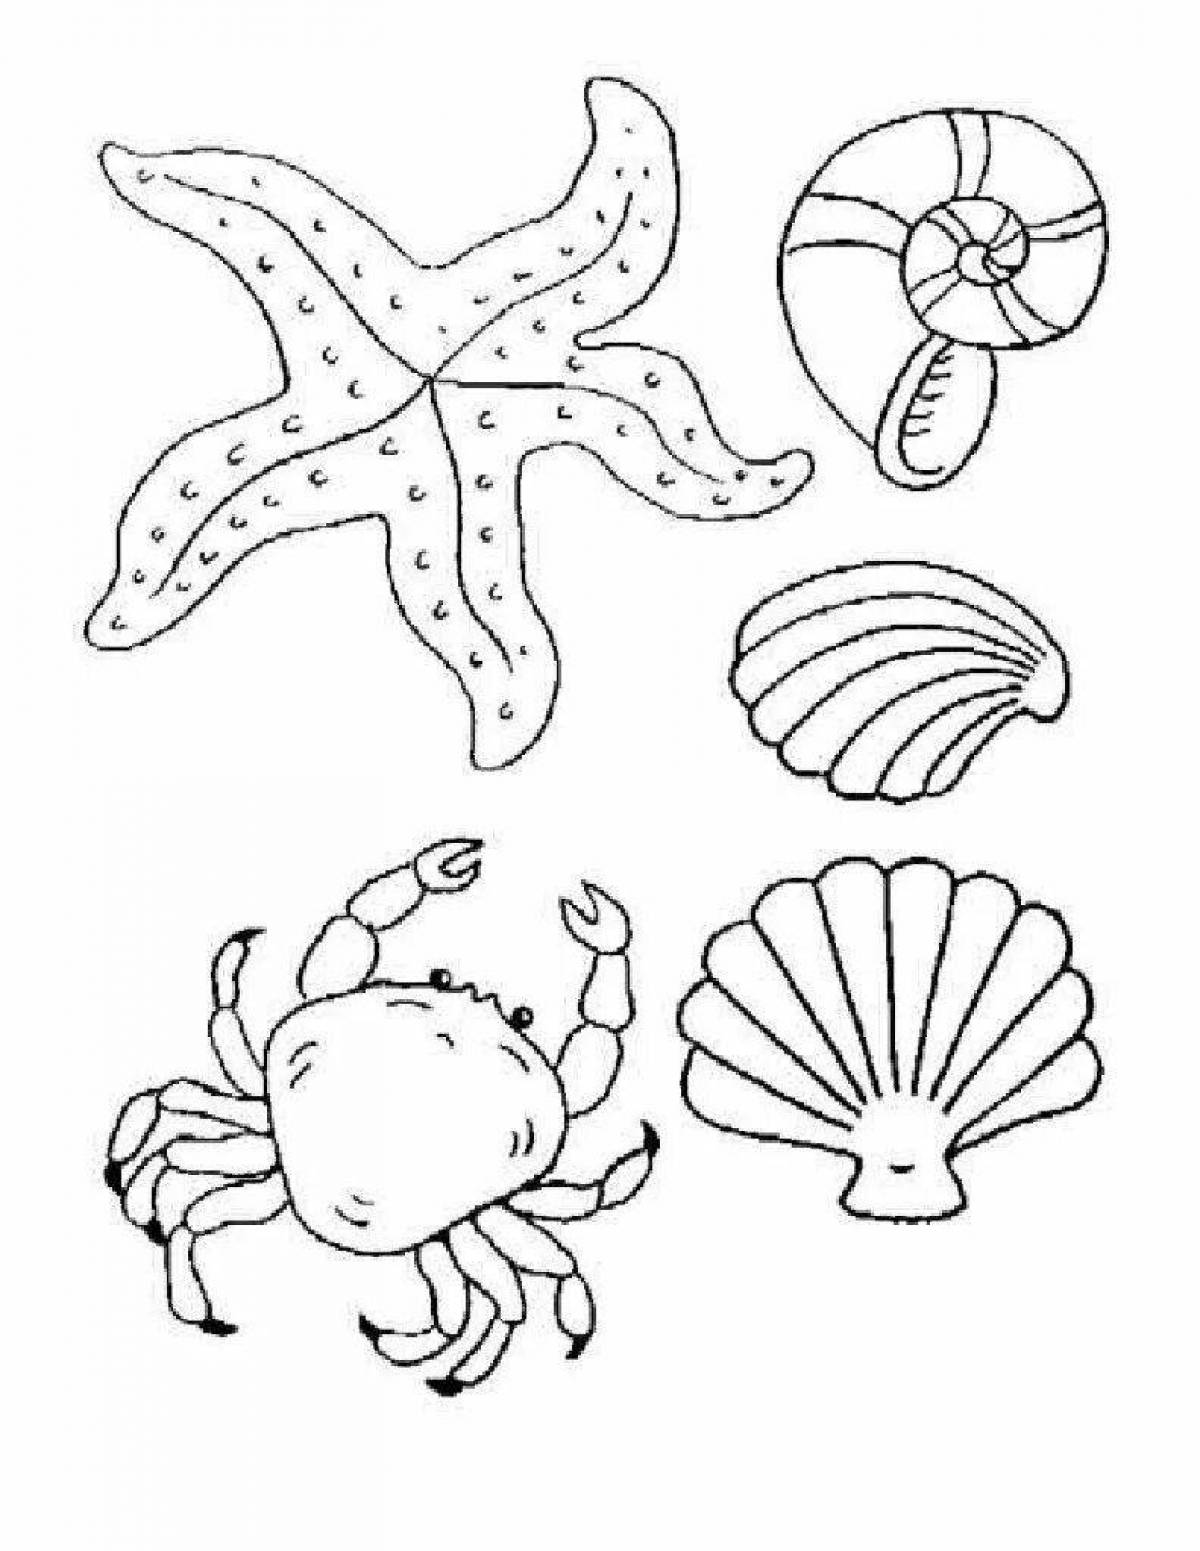 Fancy coloring pages of marine life